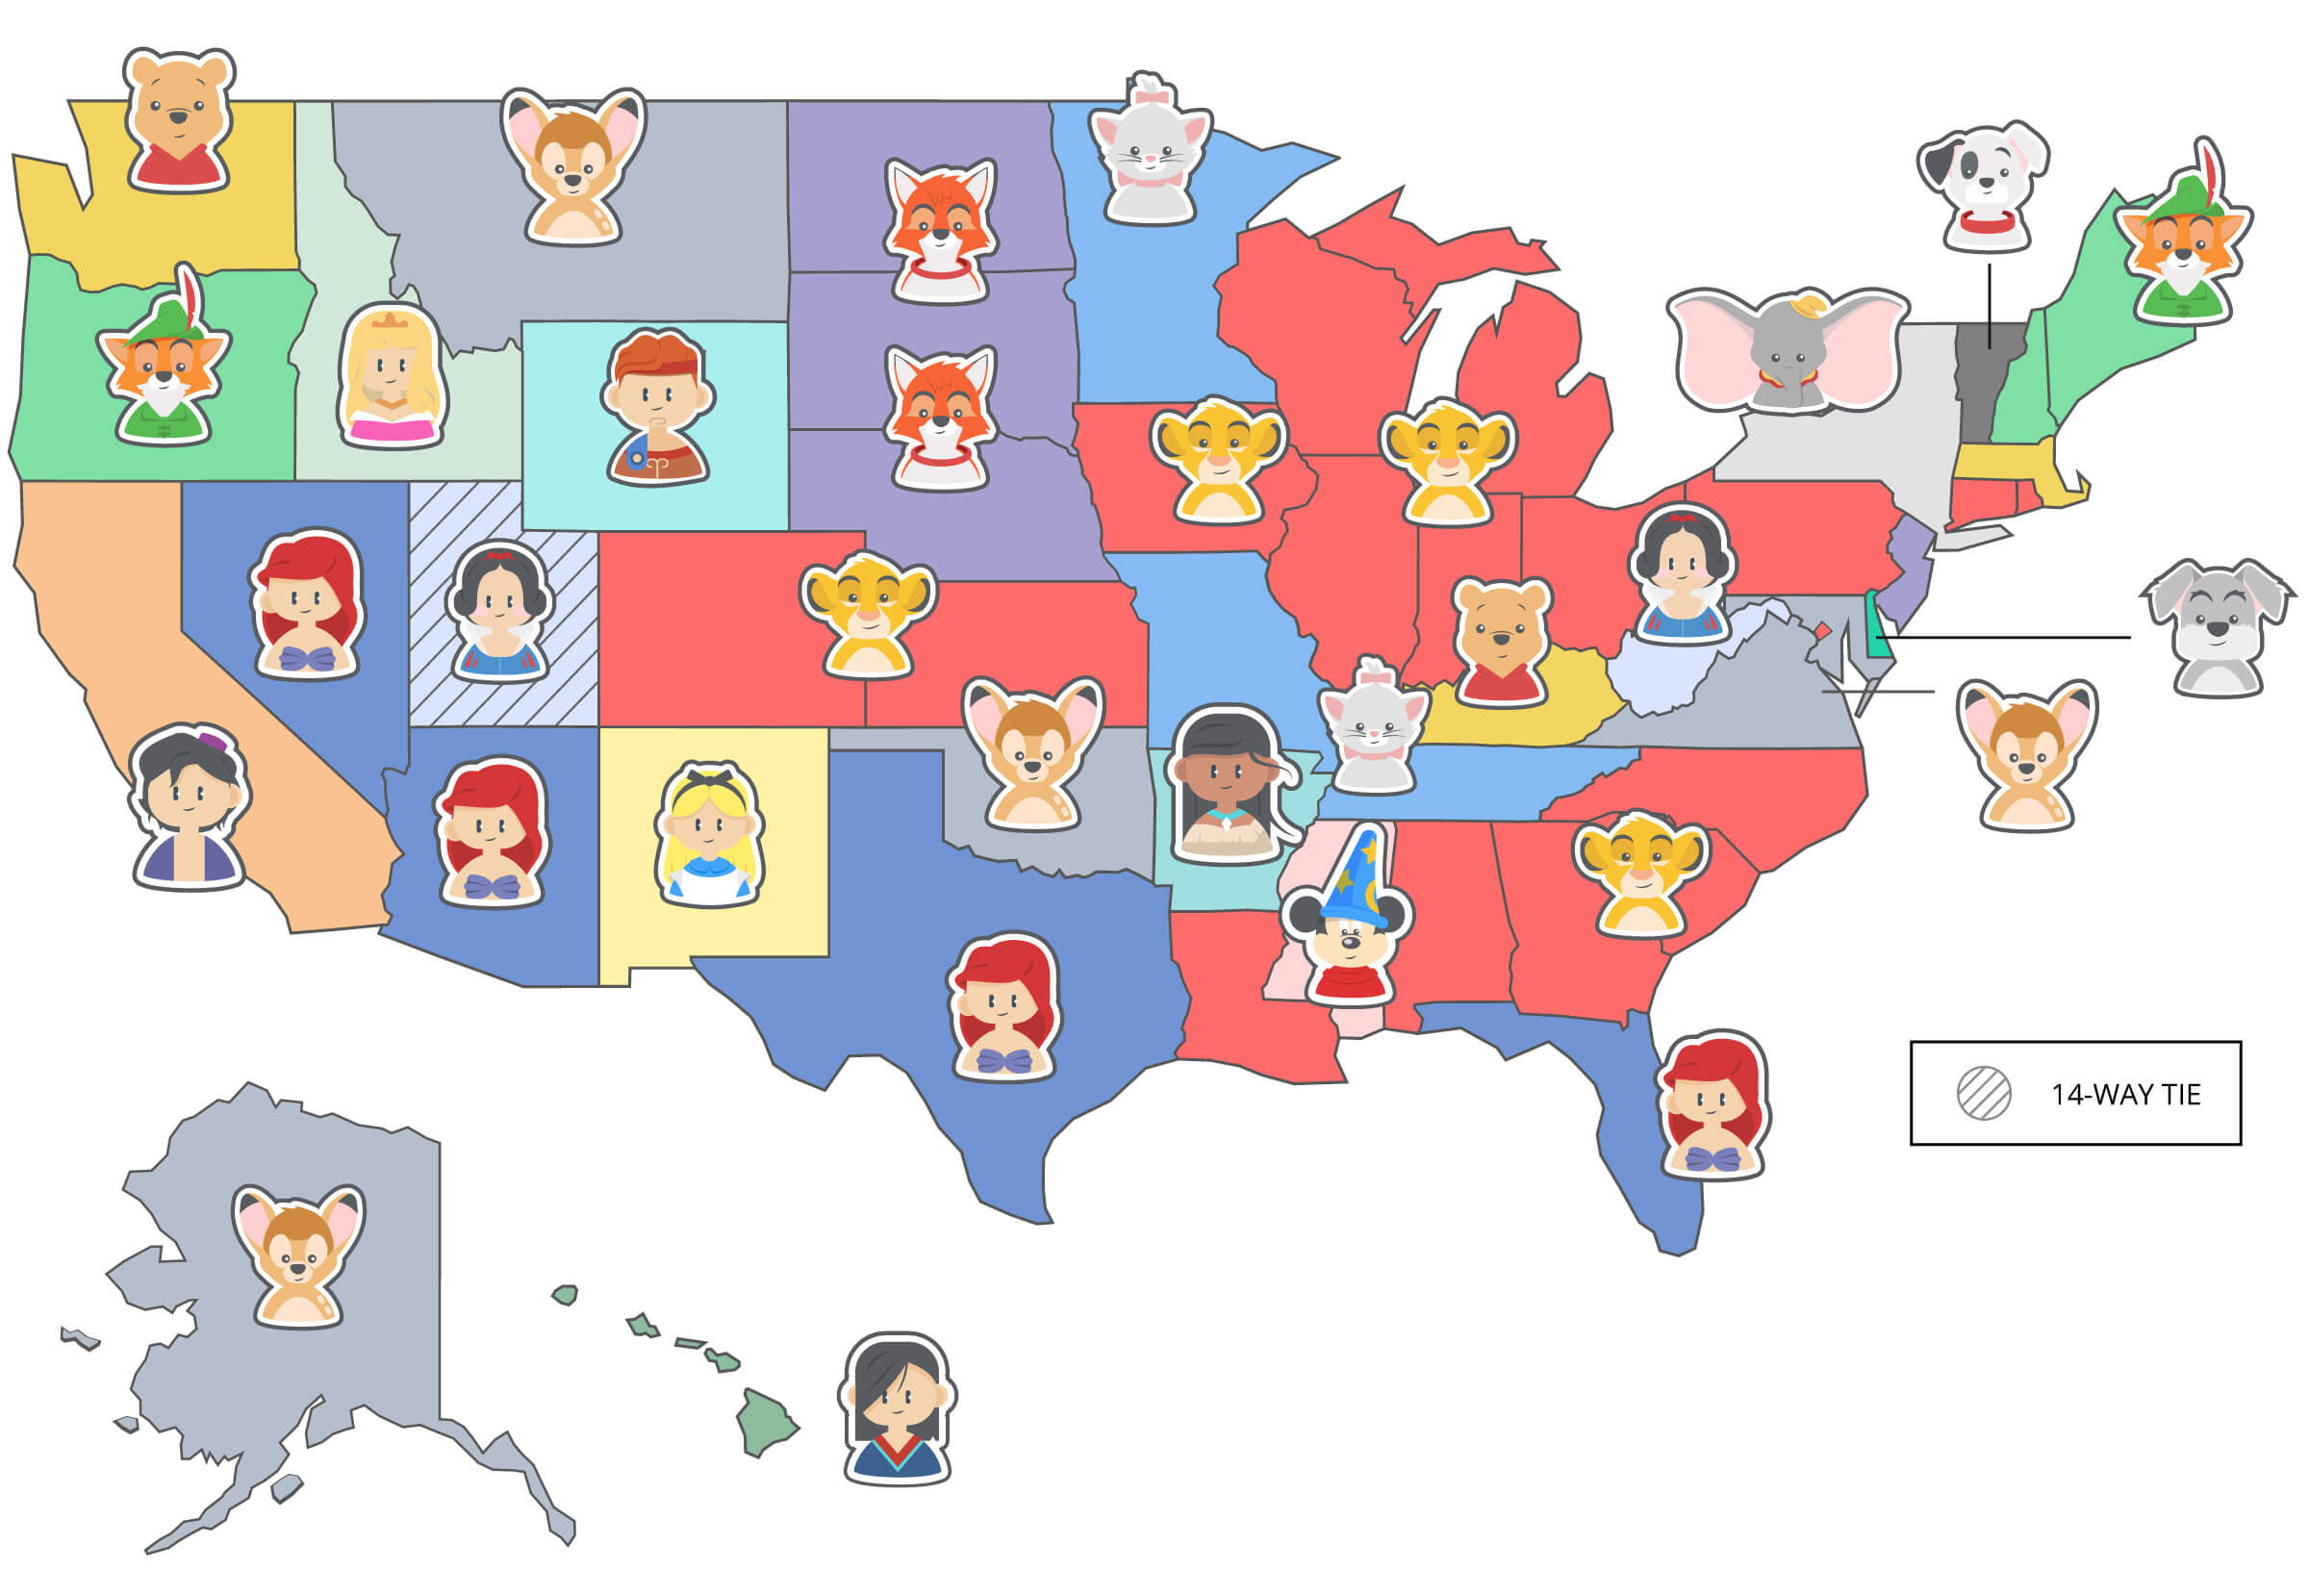 Map of Favorite Disney Characters by U.S. States